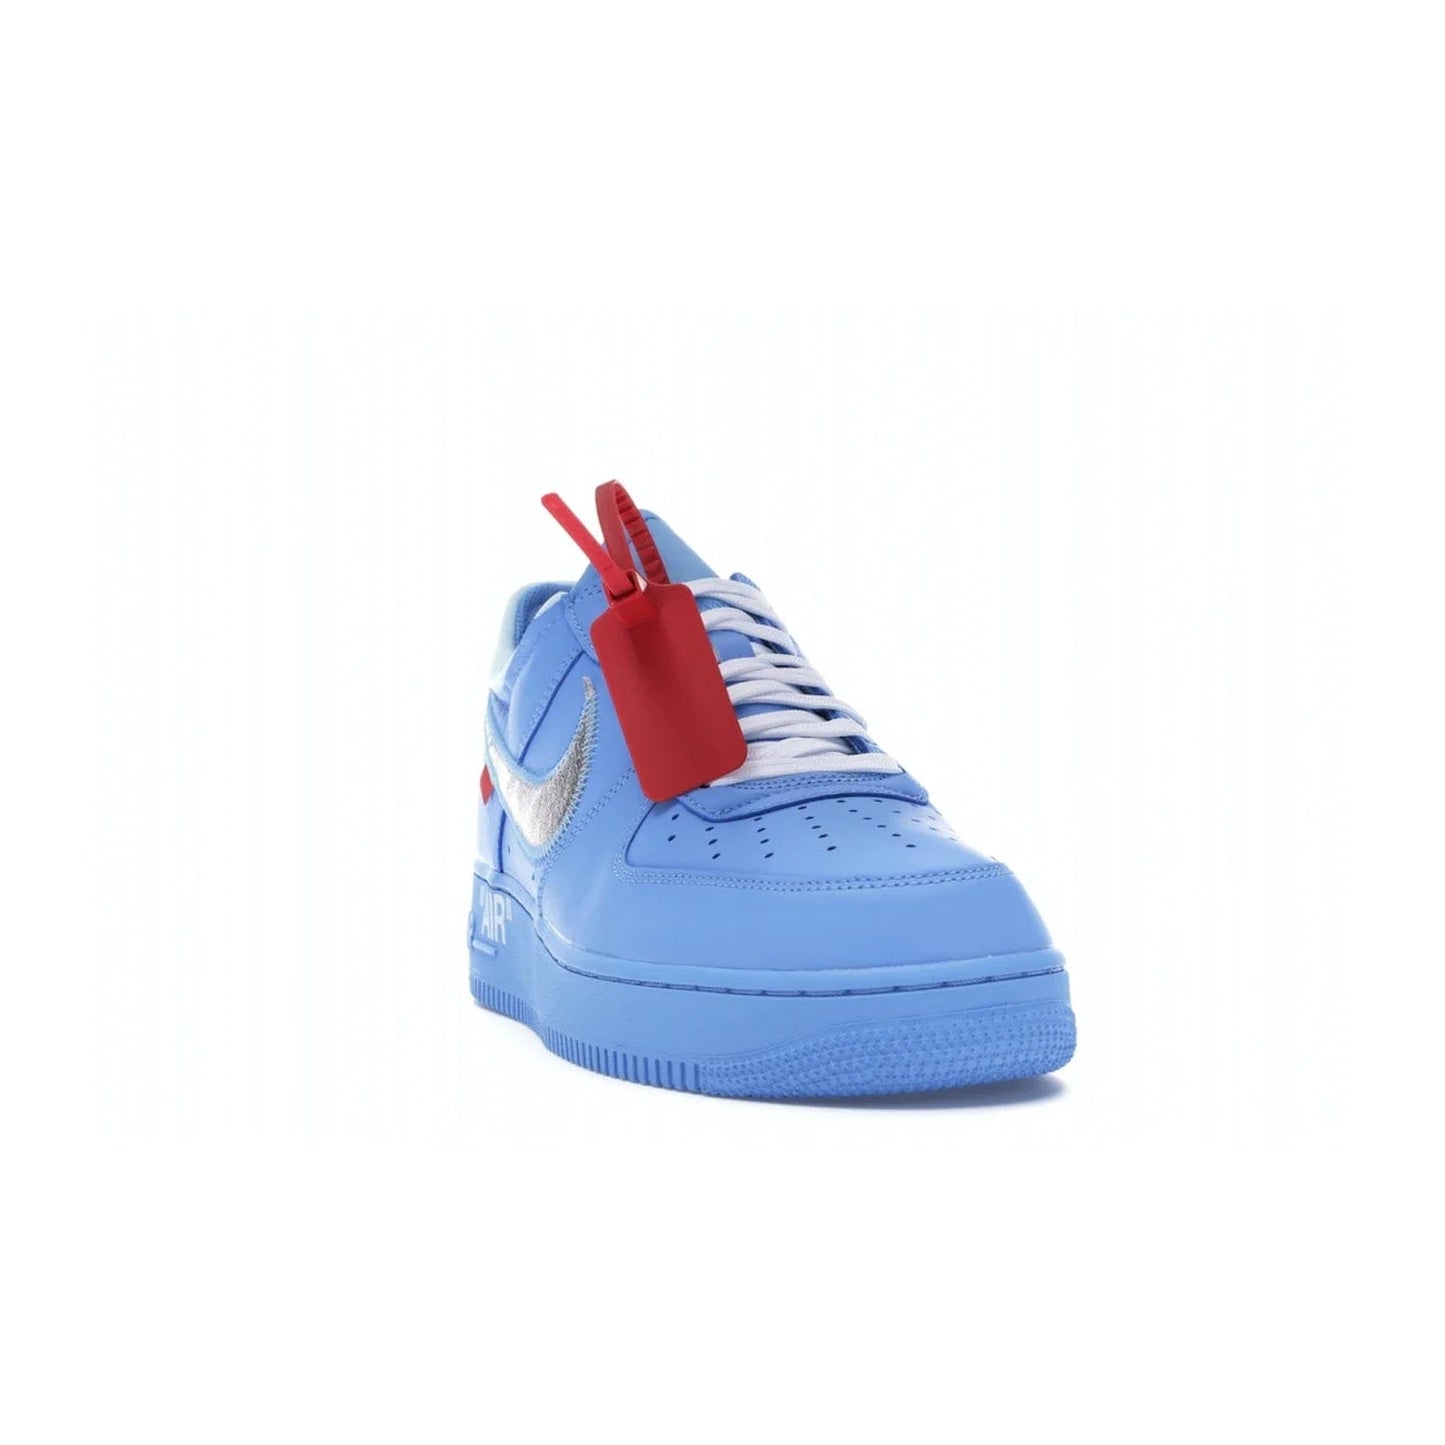 Nike Air Force 1 Low Off-White MCA University Blue - Image 8 - Only at www.BallersClubKickz.com - Virgil Abloh's Air Force 1 Low Off-White MCA University Blue: Features University Blue leather and midsole, reflective silver Nike Swoosh, red zip tie, white laces, and iconic Off-White™ branding. A must-have for any Virgil Abloh enthusiast.